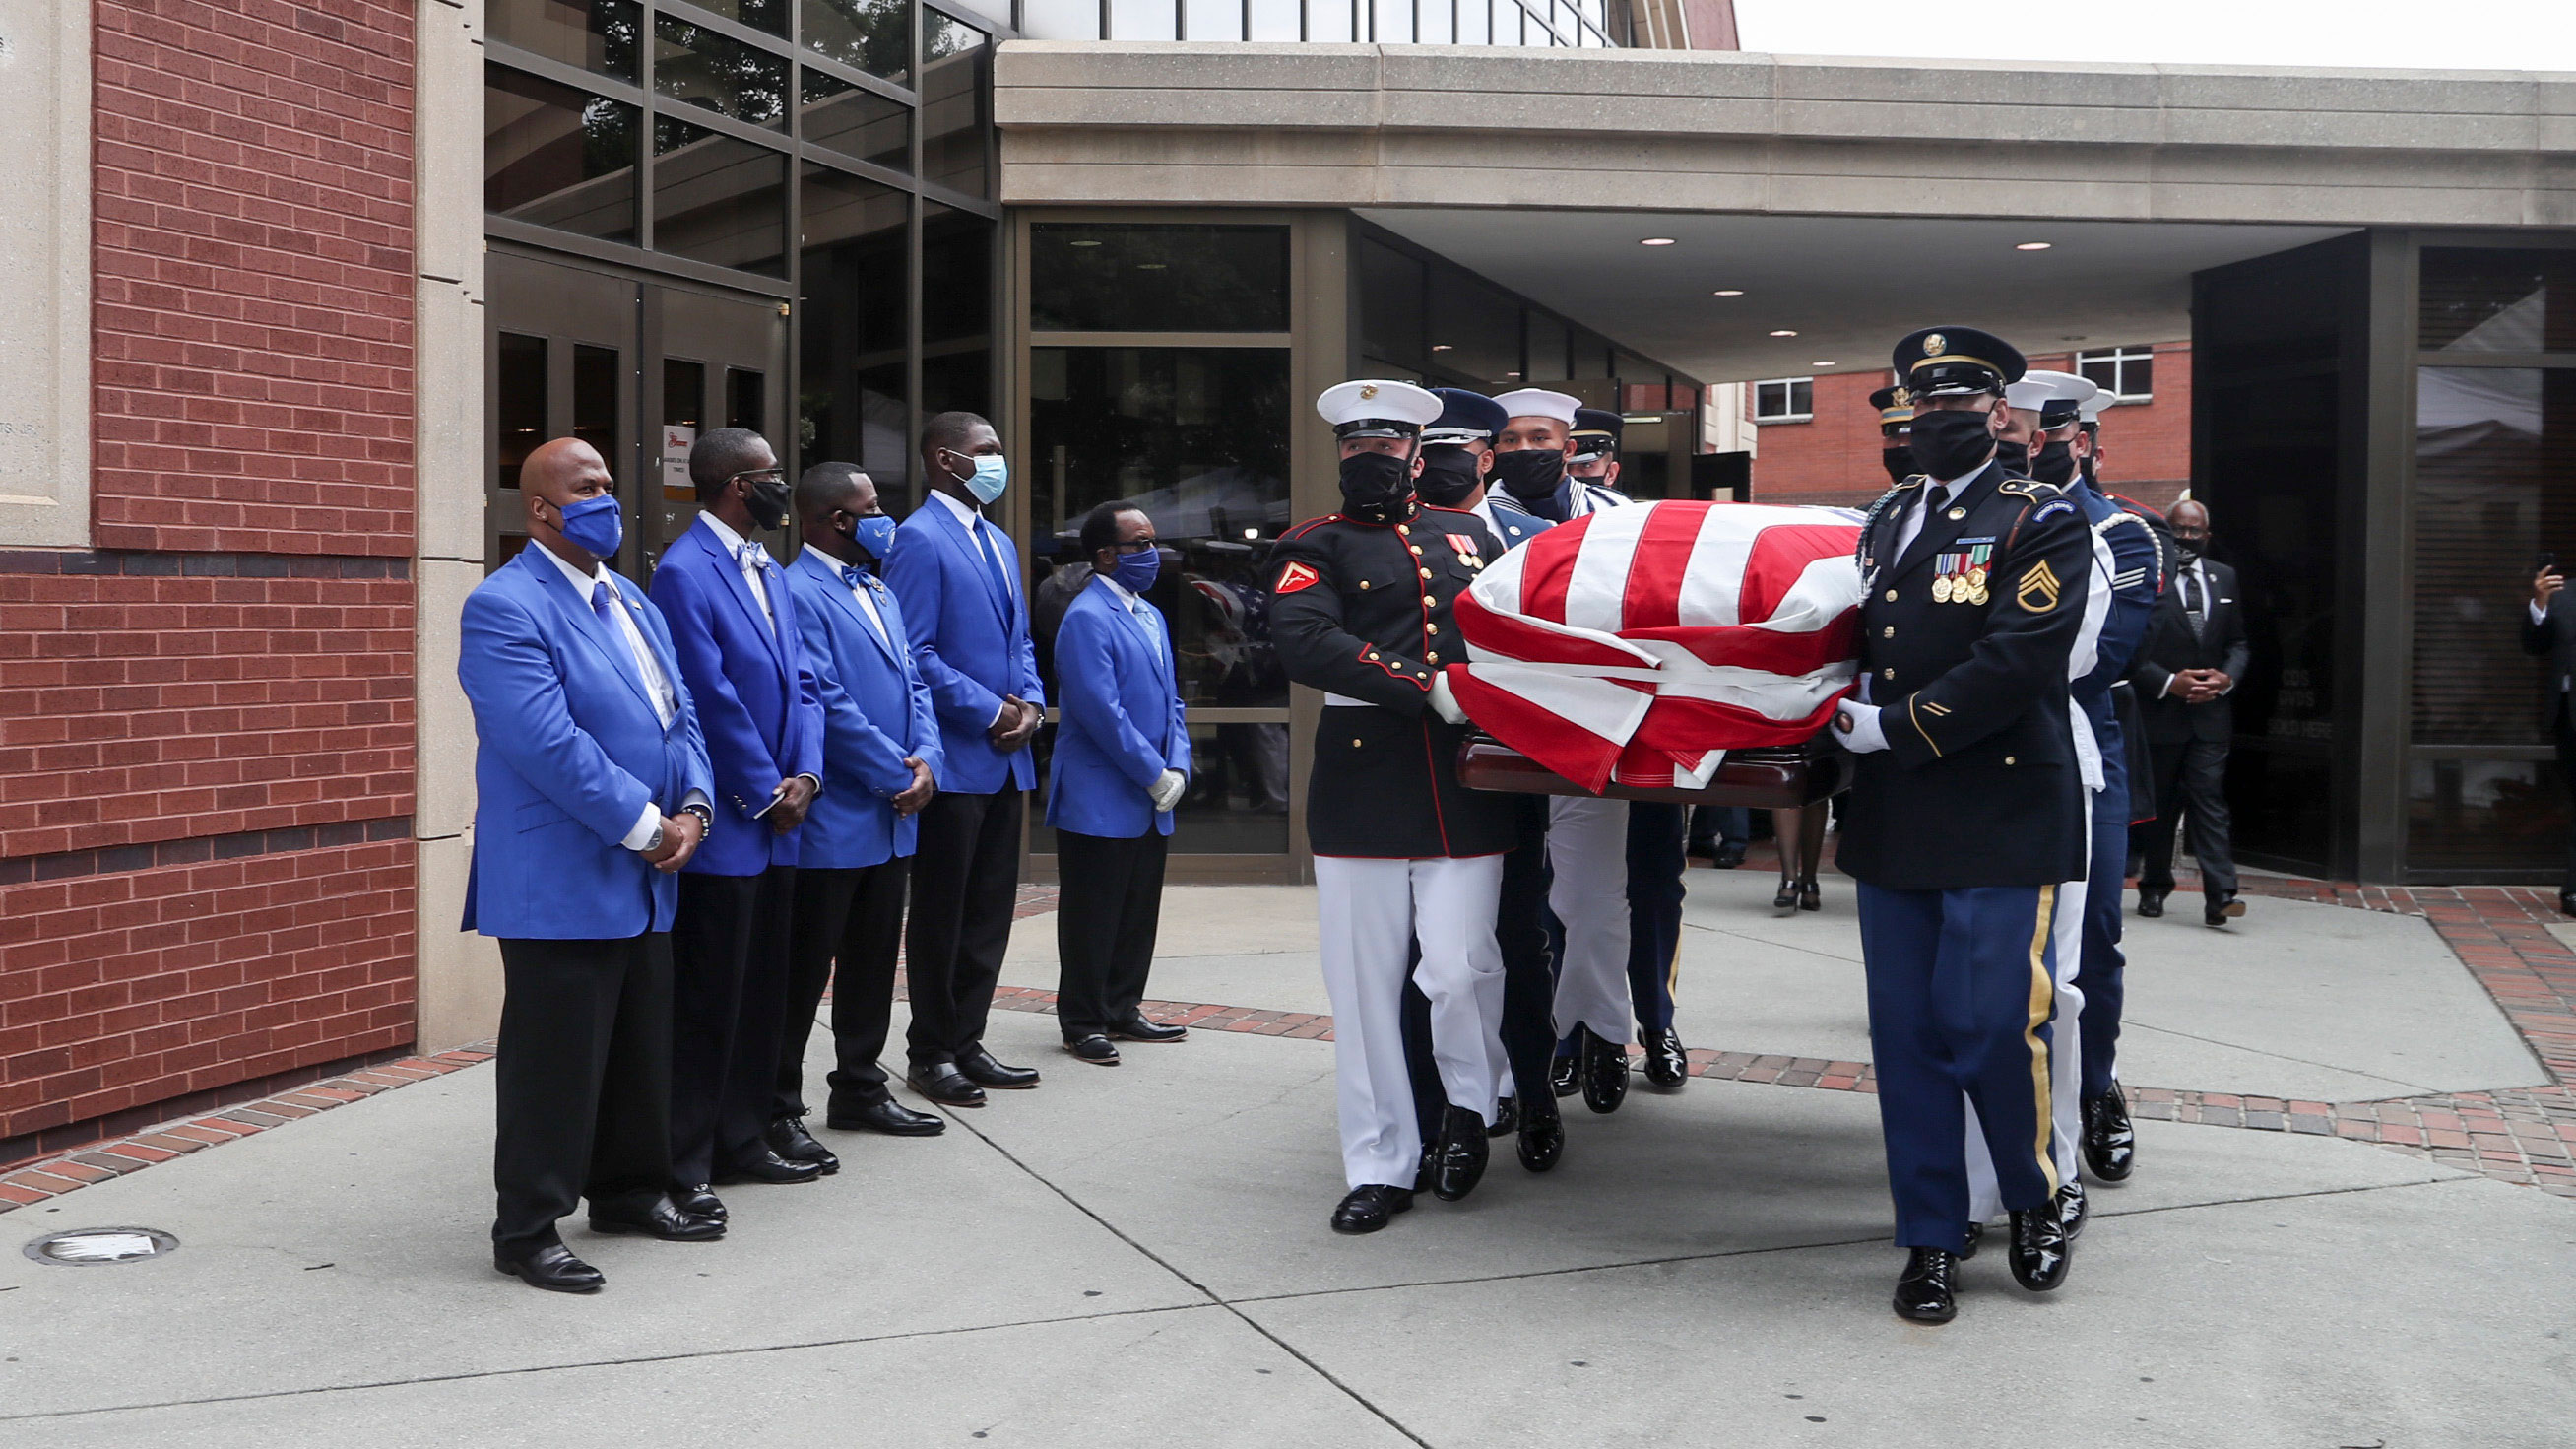 Pallbearers carry the body of Rep. John Lewis after funeral services at Ebenezer Baptist Church on July 30 in Atlanta.